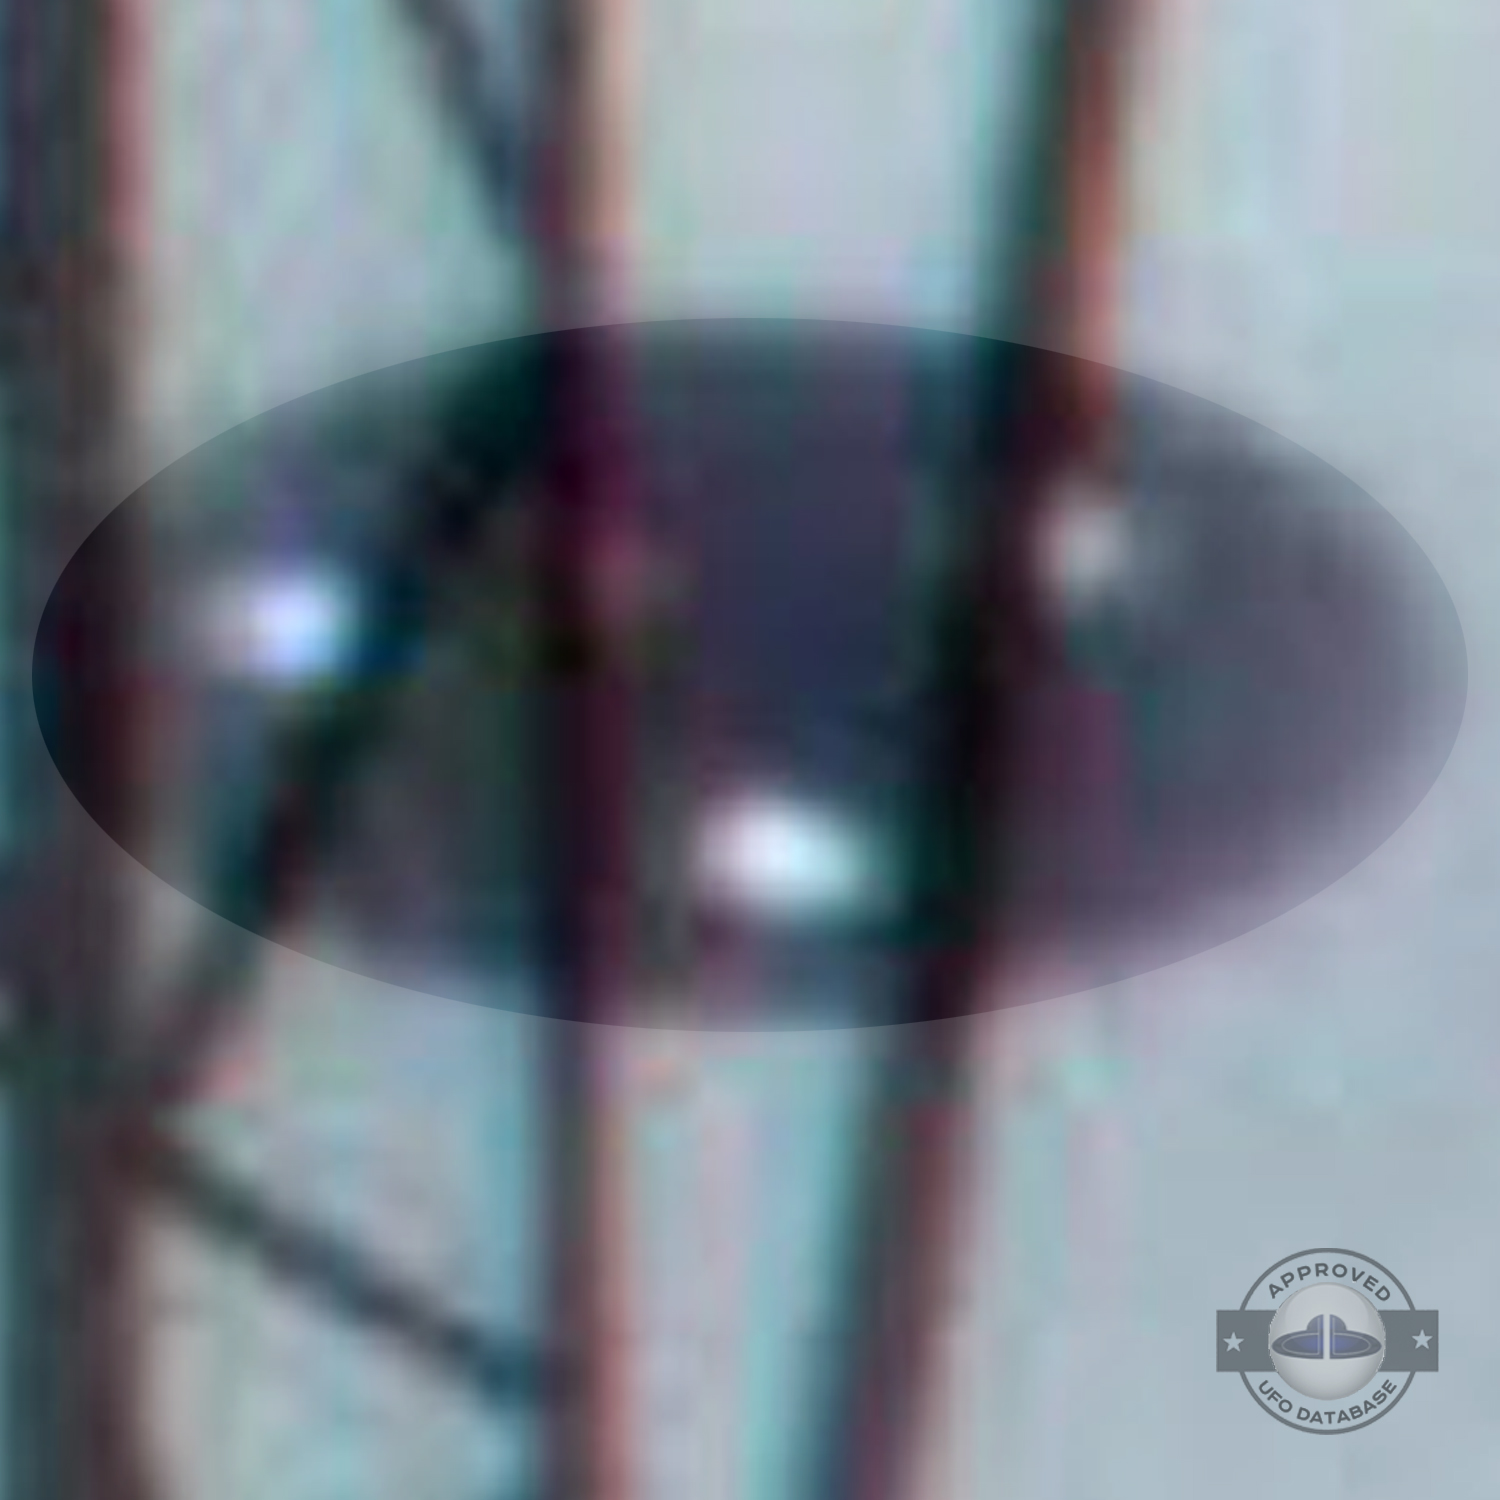 Witness of UFO get pulsating vibrations in Wurzburg, Germany 2009 UFO Picture #216-6